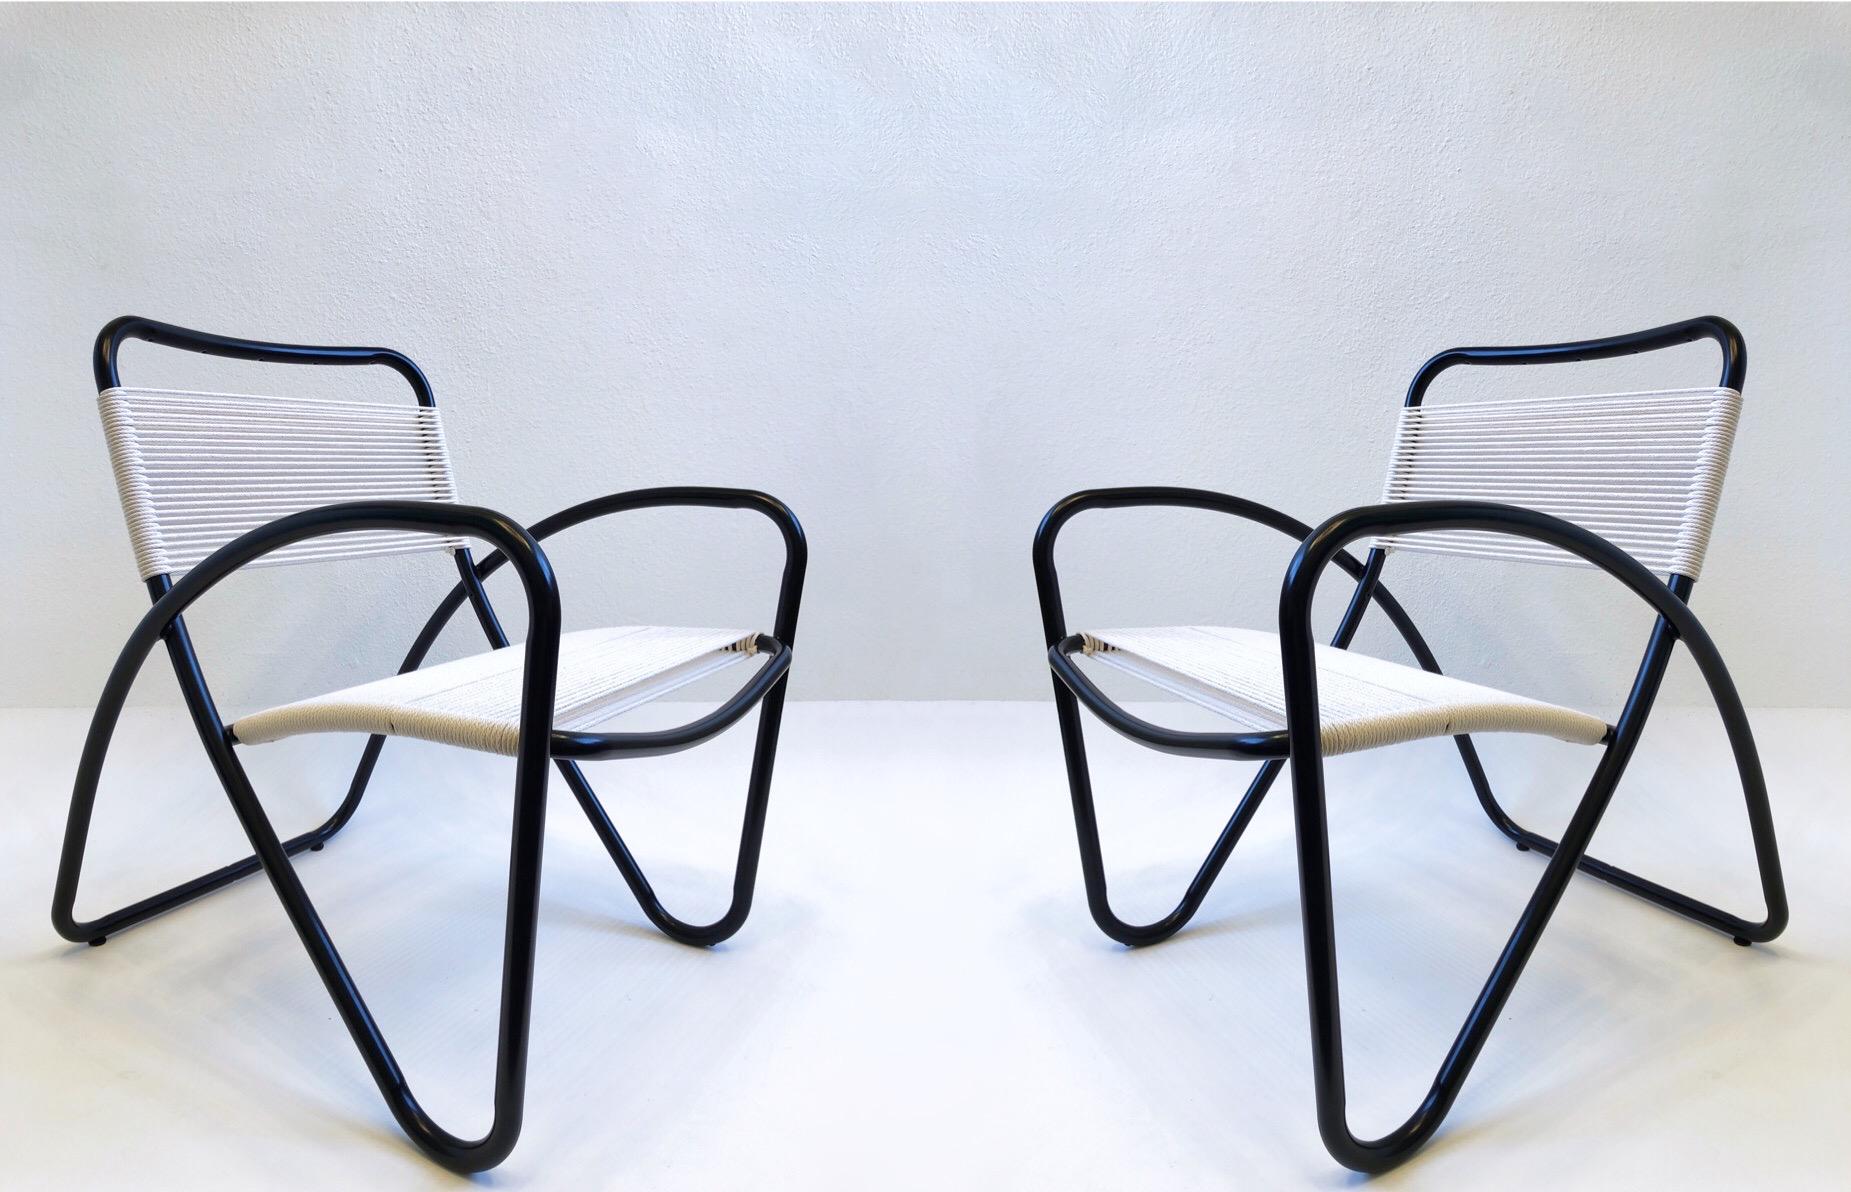 Set of four 1970’s sculptural black powder coated aluminum outdoor lounge chairs by Brown Jordan. 
Newly powder coated satin black and new cotton cord. 
Measurements: 24.5” Wide, 29” Deep 31.25” High, 16.75” Seat, 23.75” Arm.